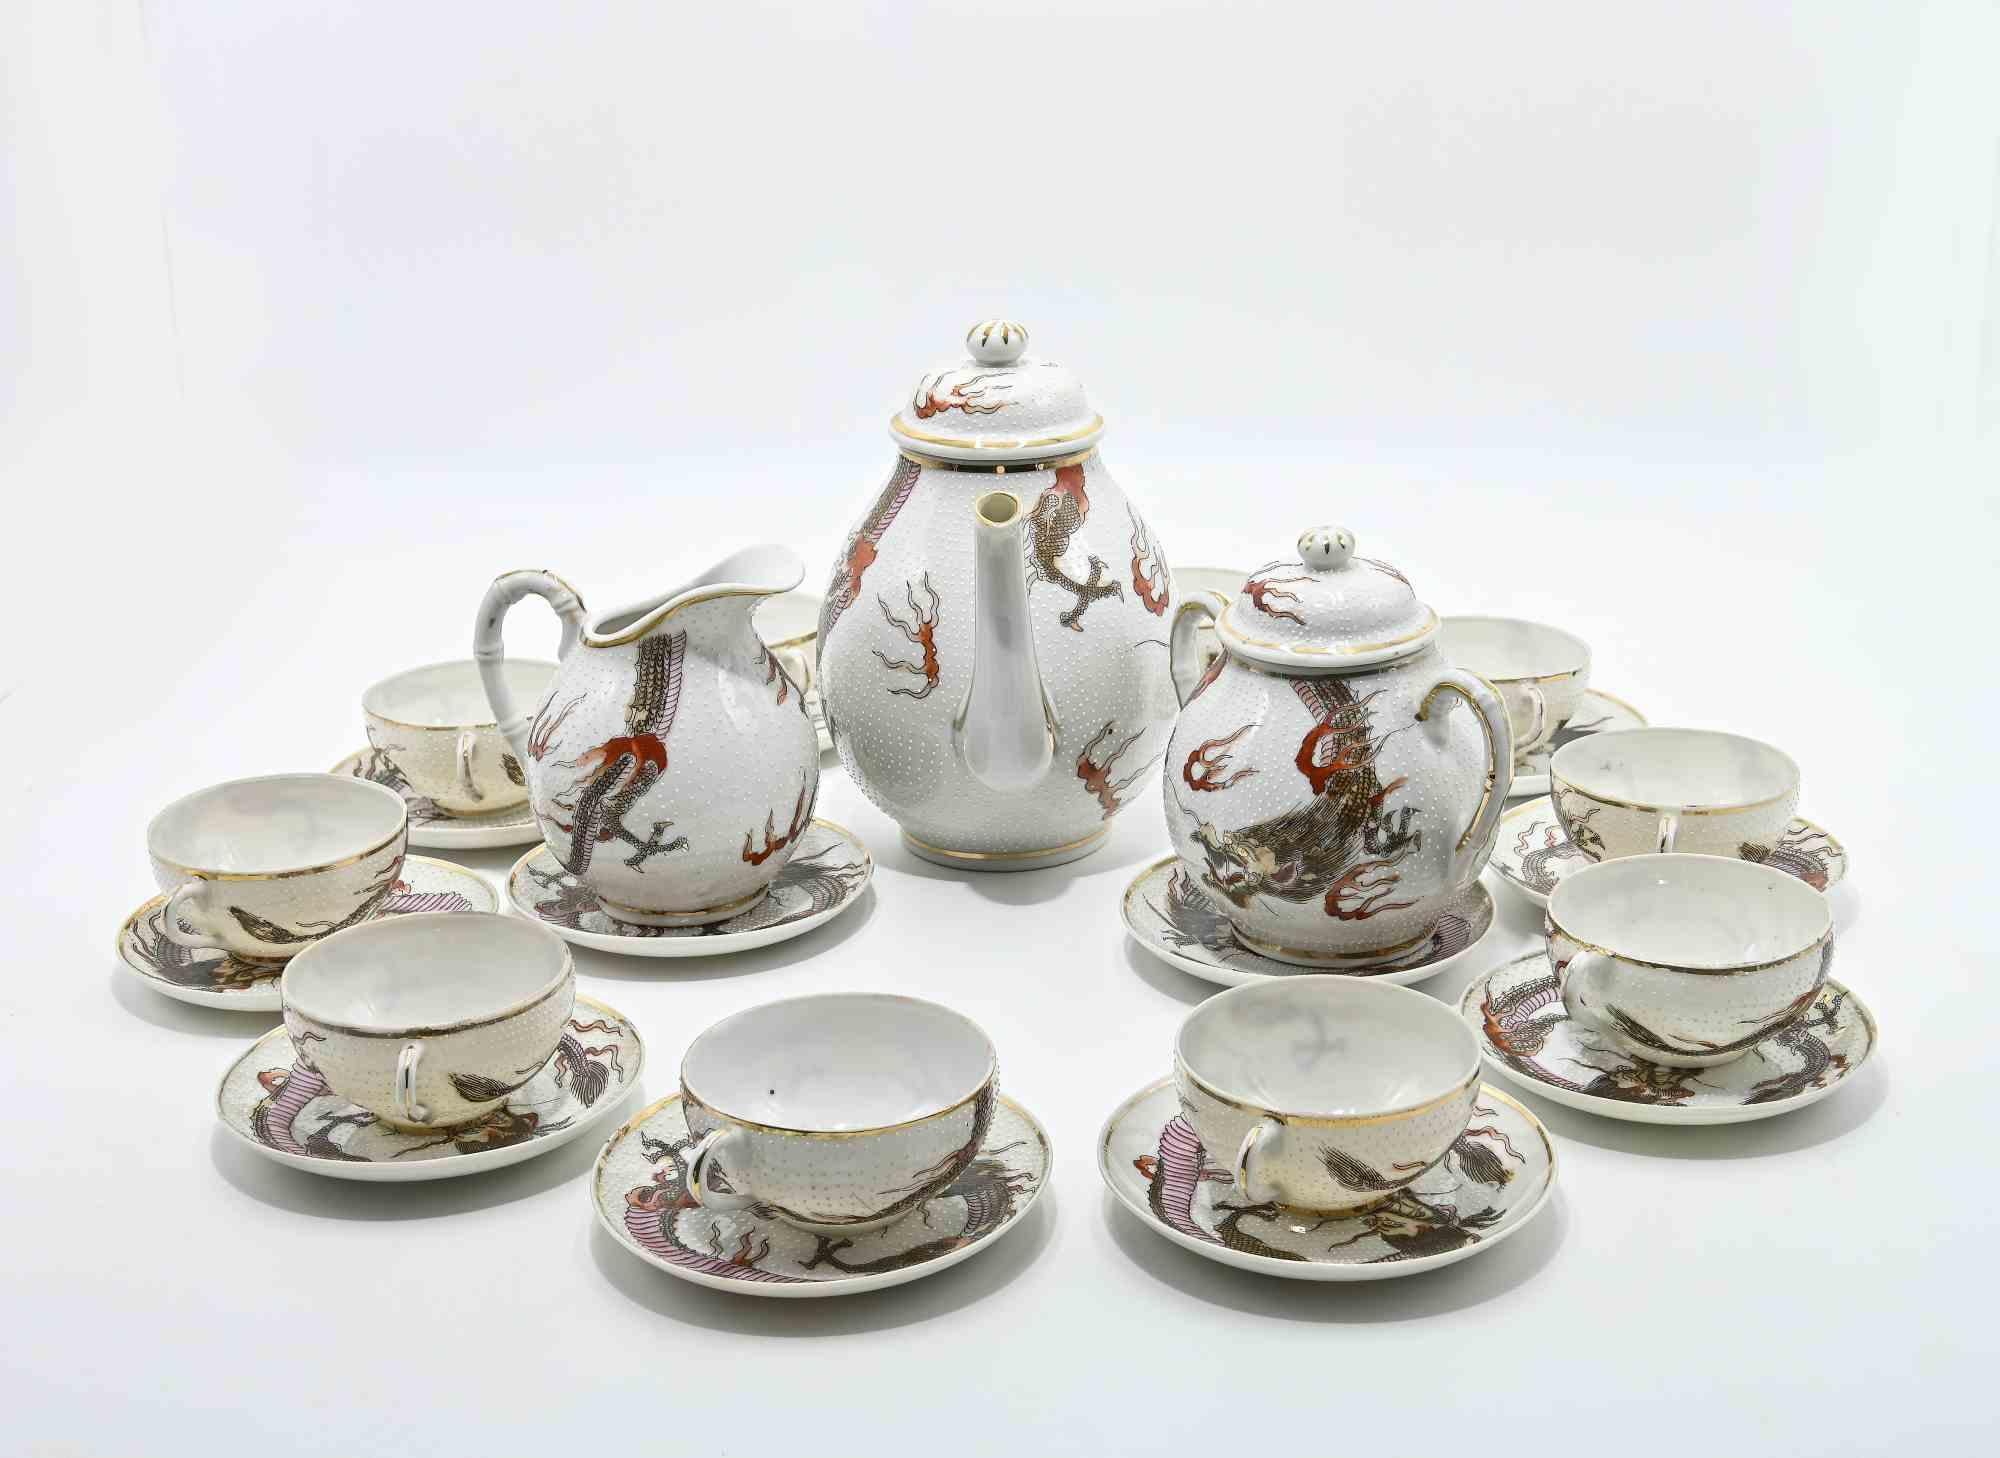 Chinese set is a 13-piece tea service, 1950s.

Hand-painted porcelain with oriental decorations.

Dimensions:  Cup D 7.5 x H 4 cm. Teapot: D 10 x H 15 cm. Saucer D 10 cm.

Very good condition!  